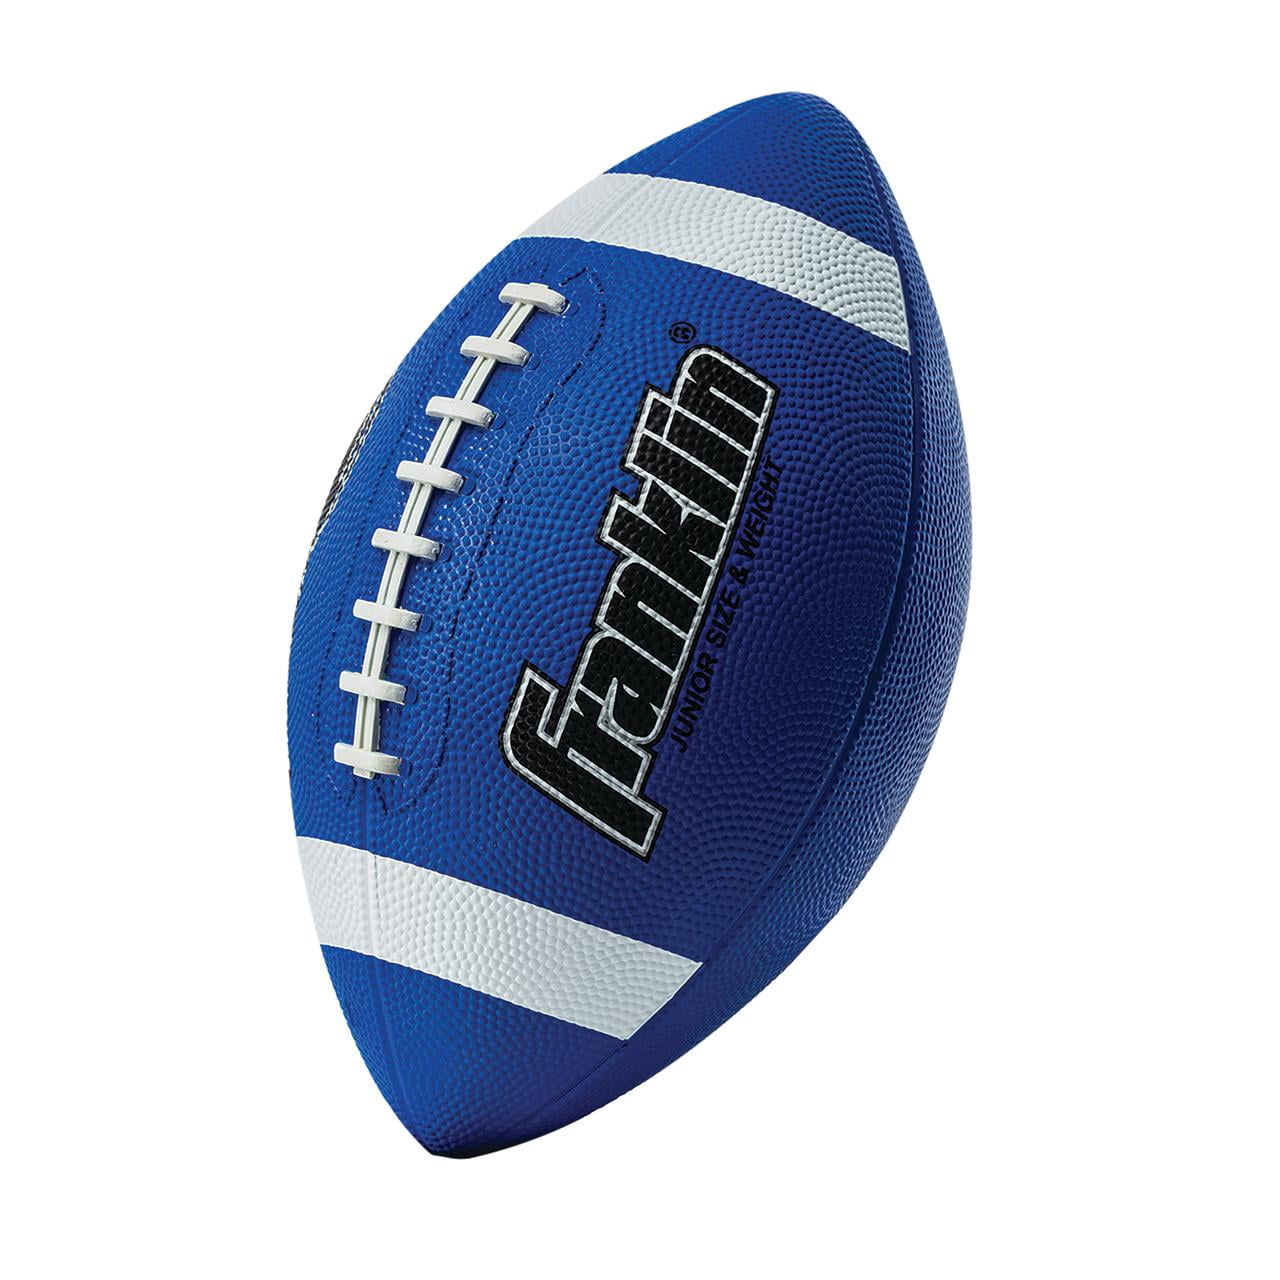 Youth American Football Outdoor Ball Game No 6 7 Junior Kids Sports Toy 